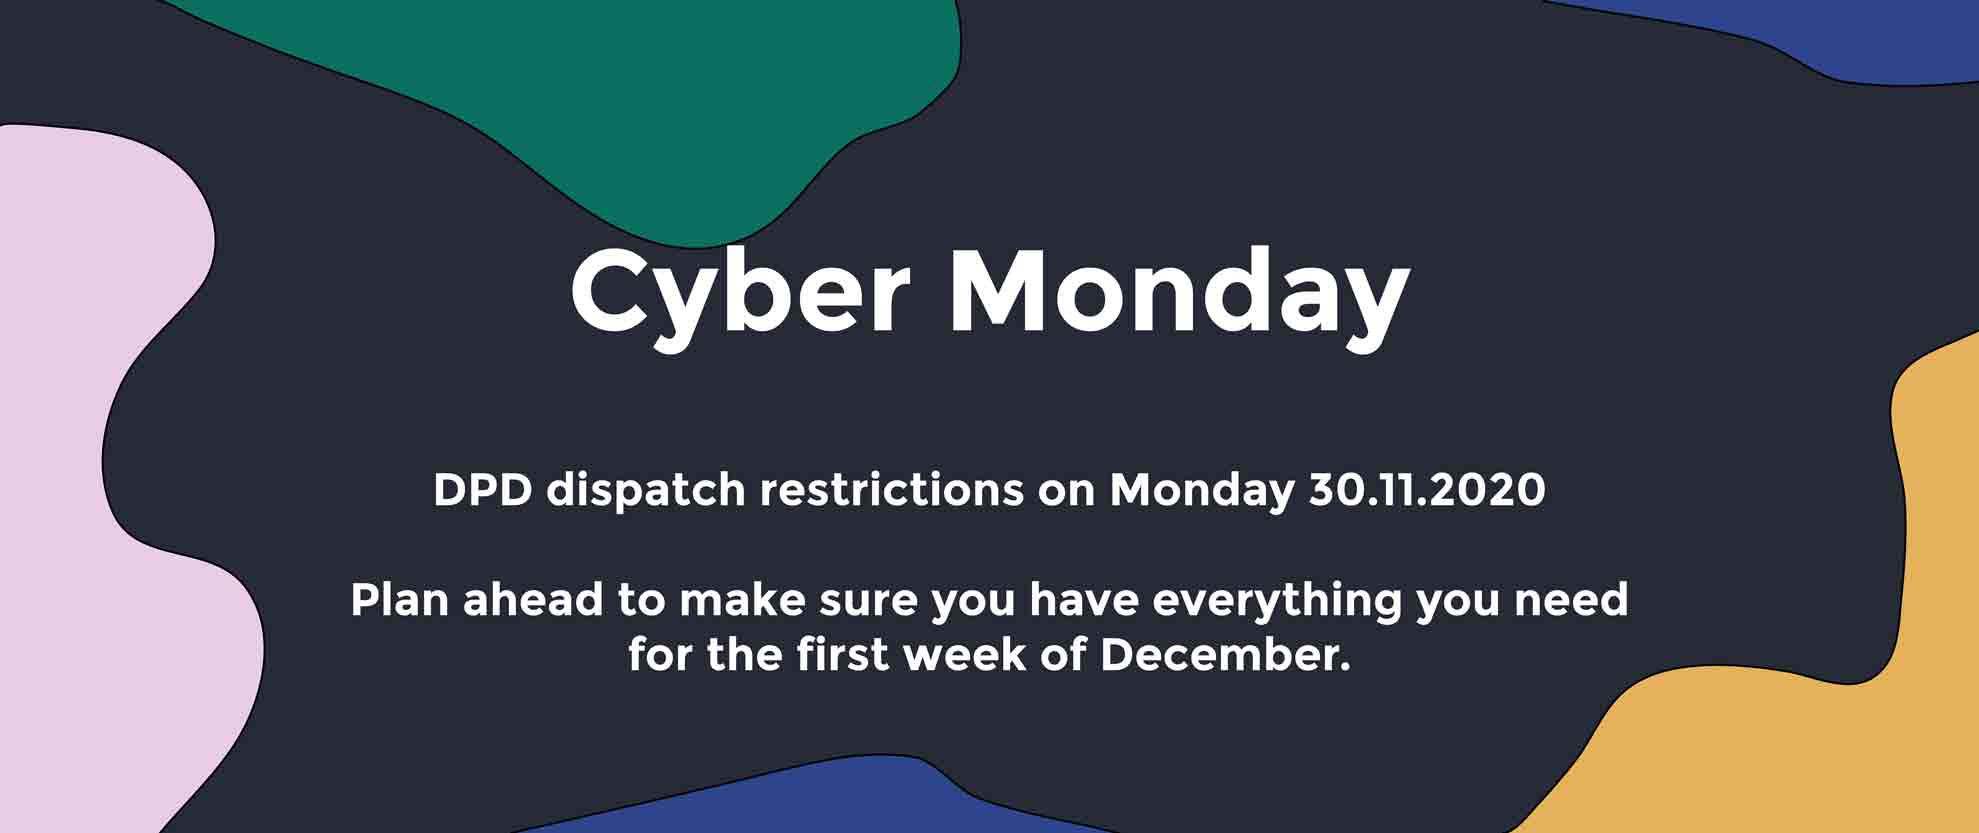 Cyber Monday DPD restrictions